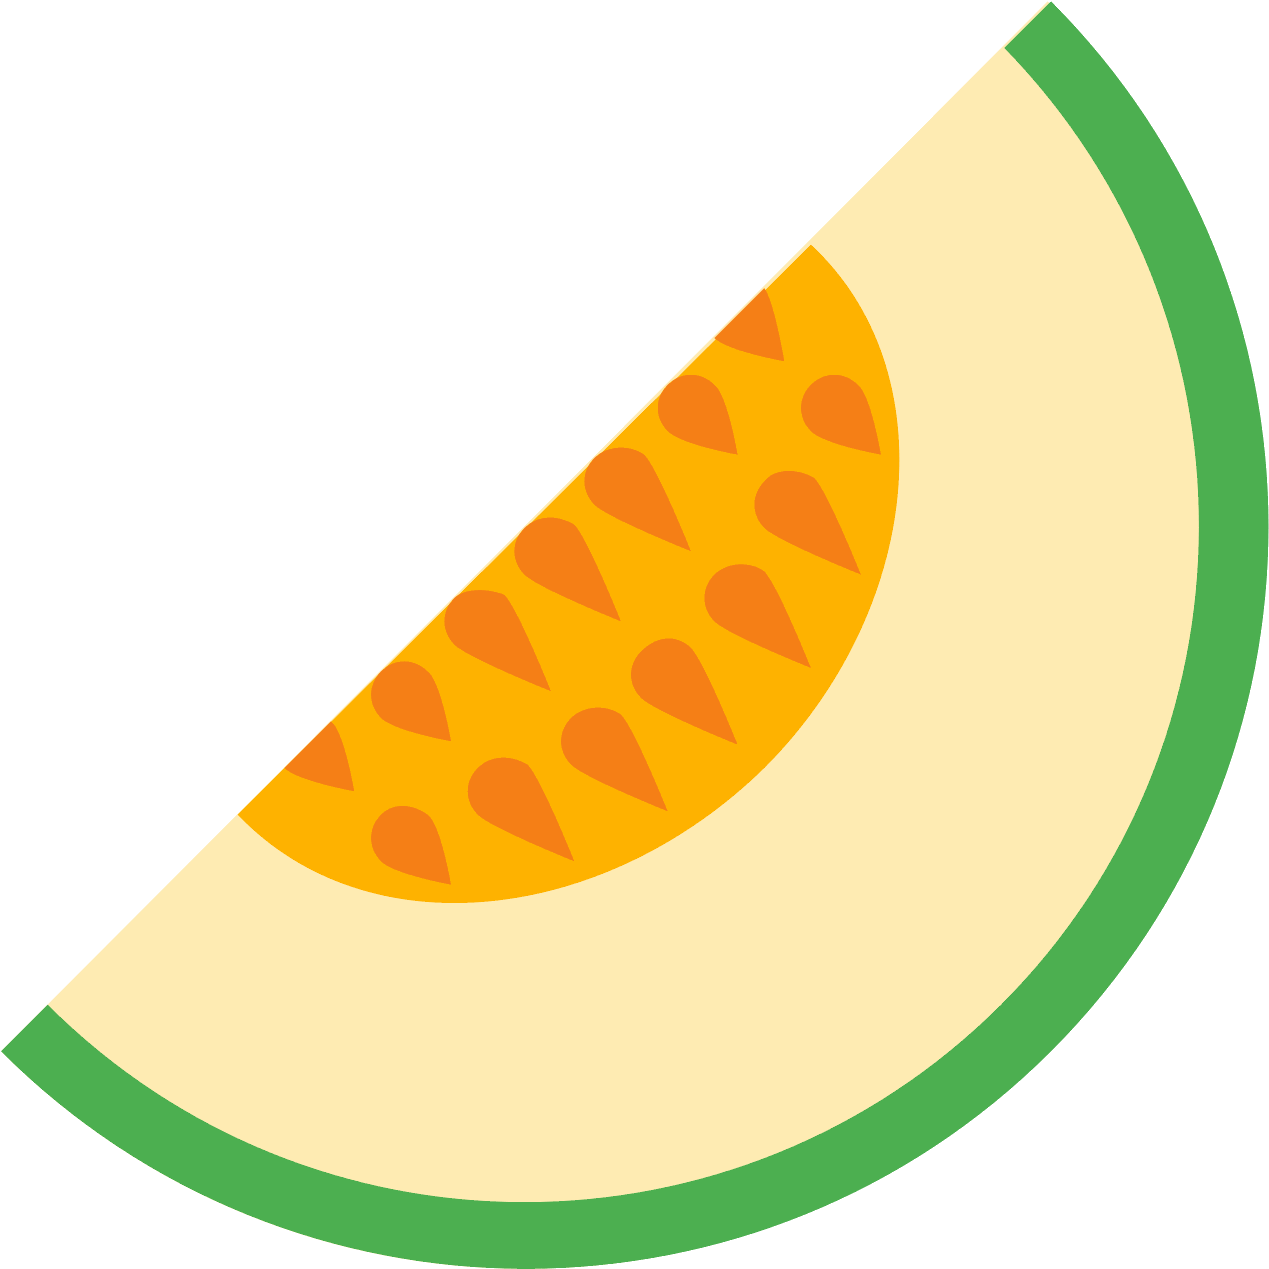 This Is A Slice Of A Melon Fruit - Melon Icon Png (1600x1600)